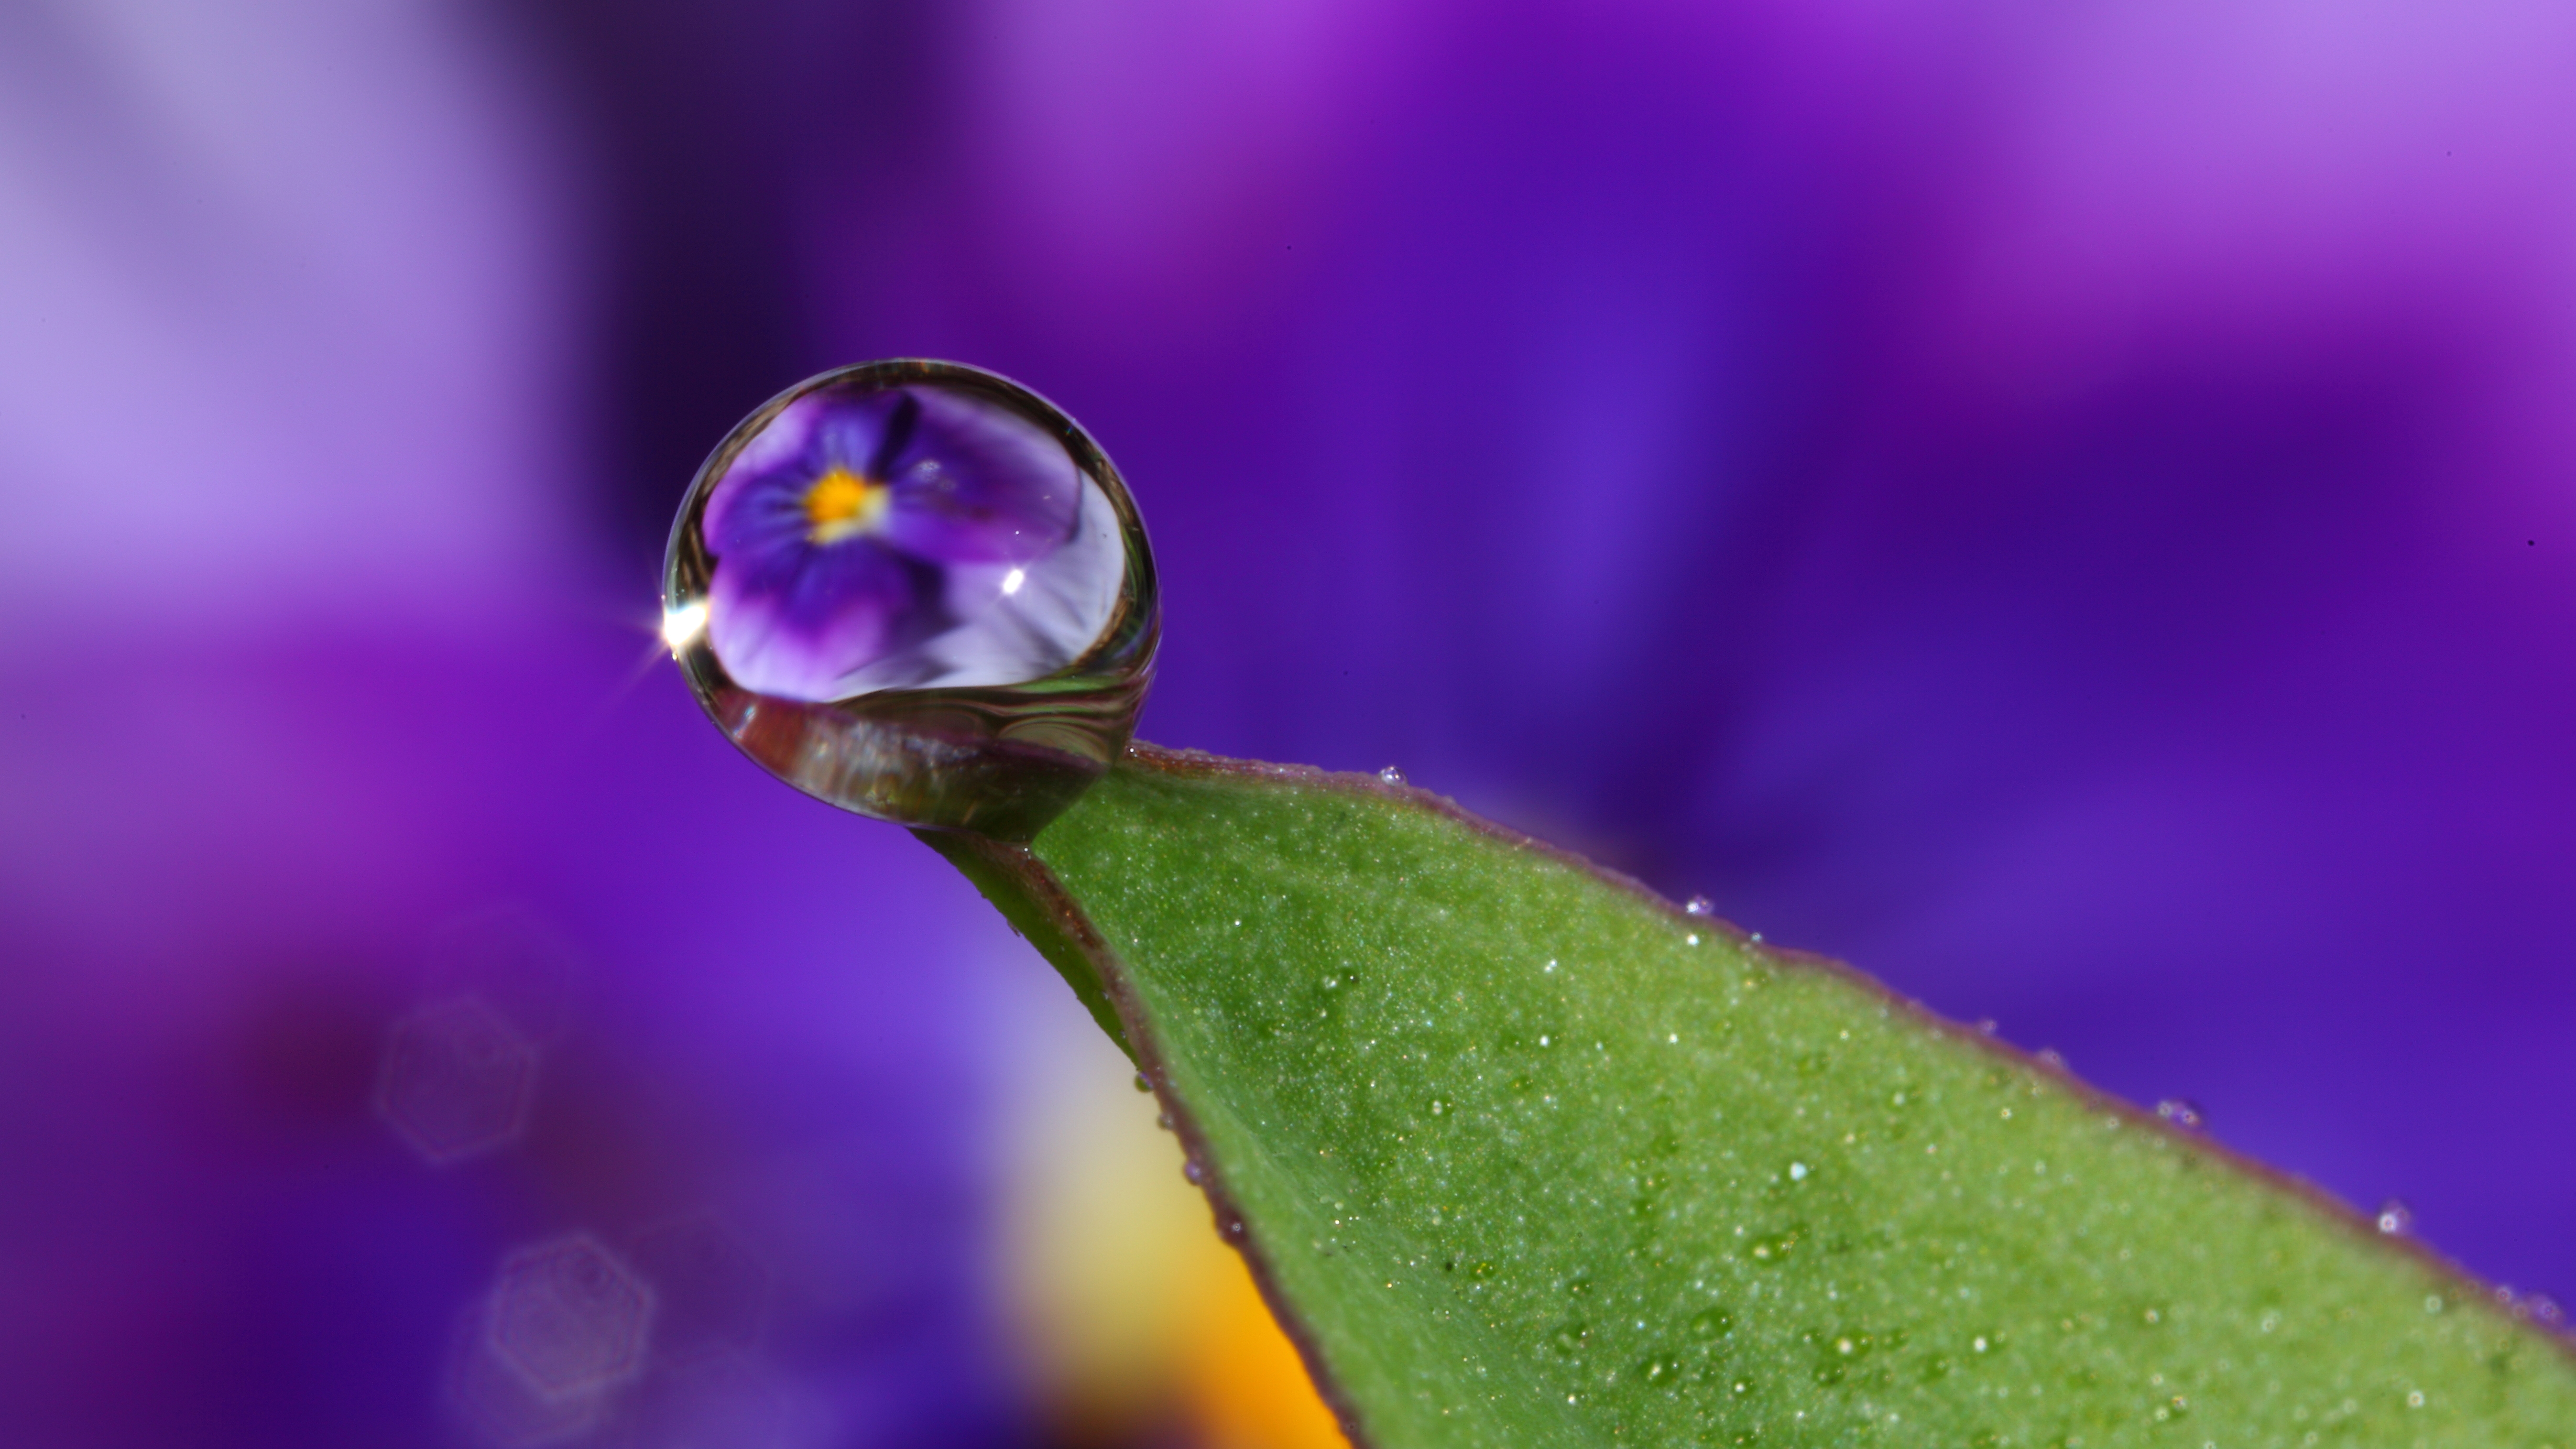 A water droplet on the tip of a leaf